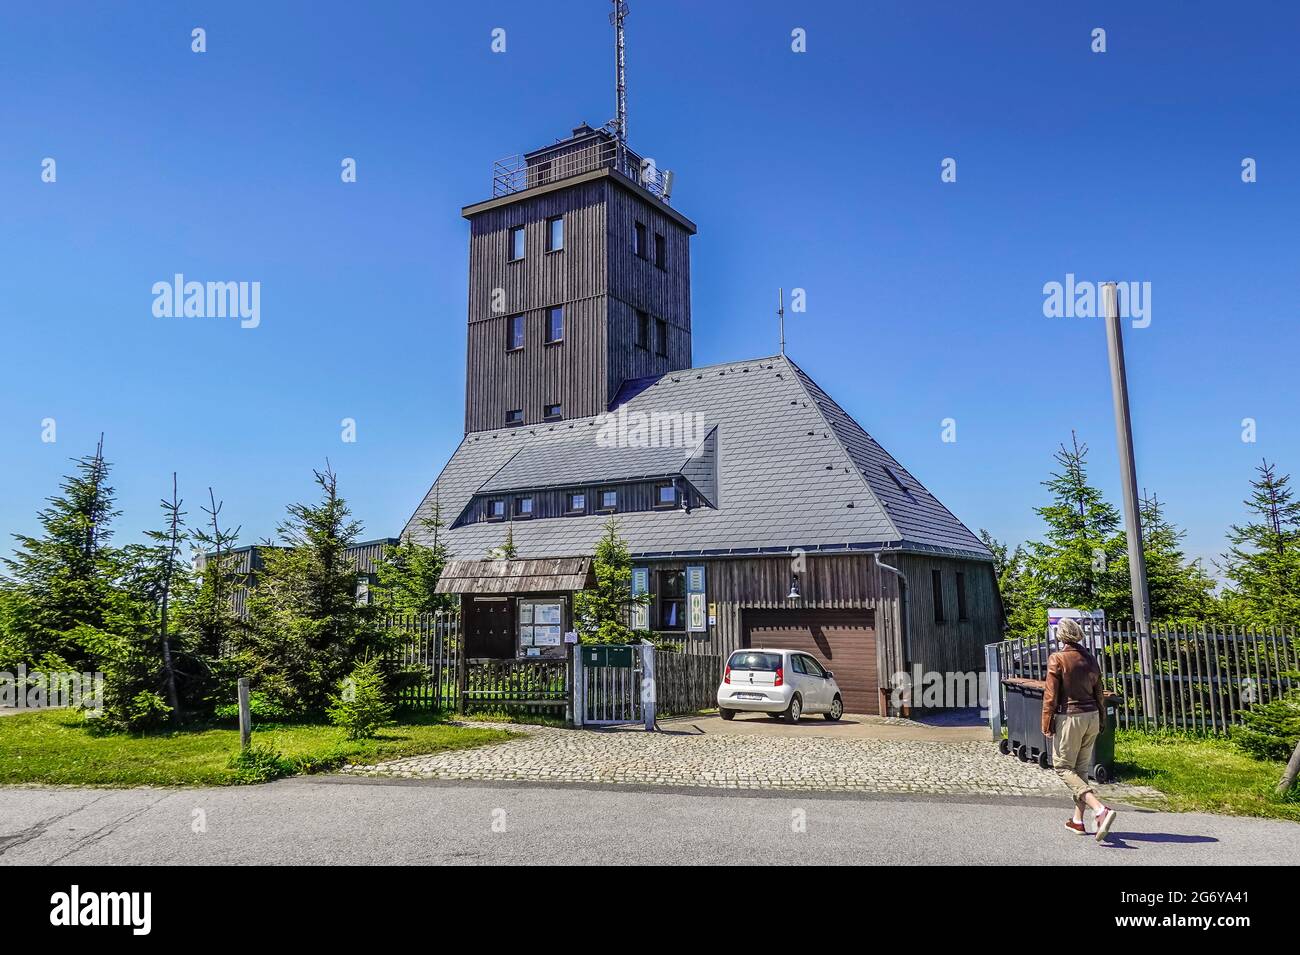 Page 4 - Erzgebirgische High Resolution Stock Photography and Images - Alamy